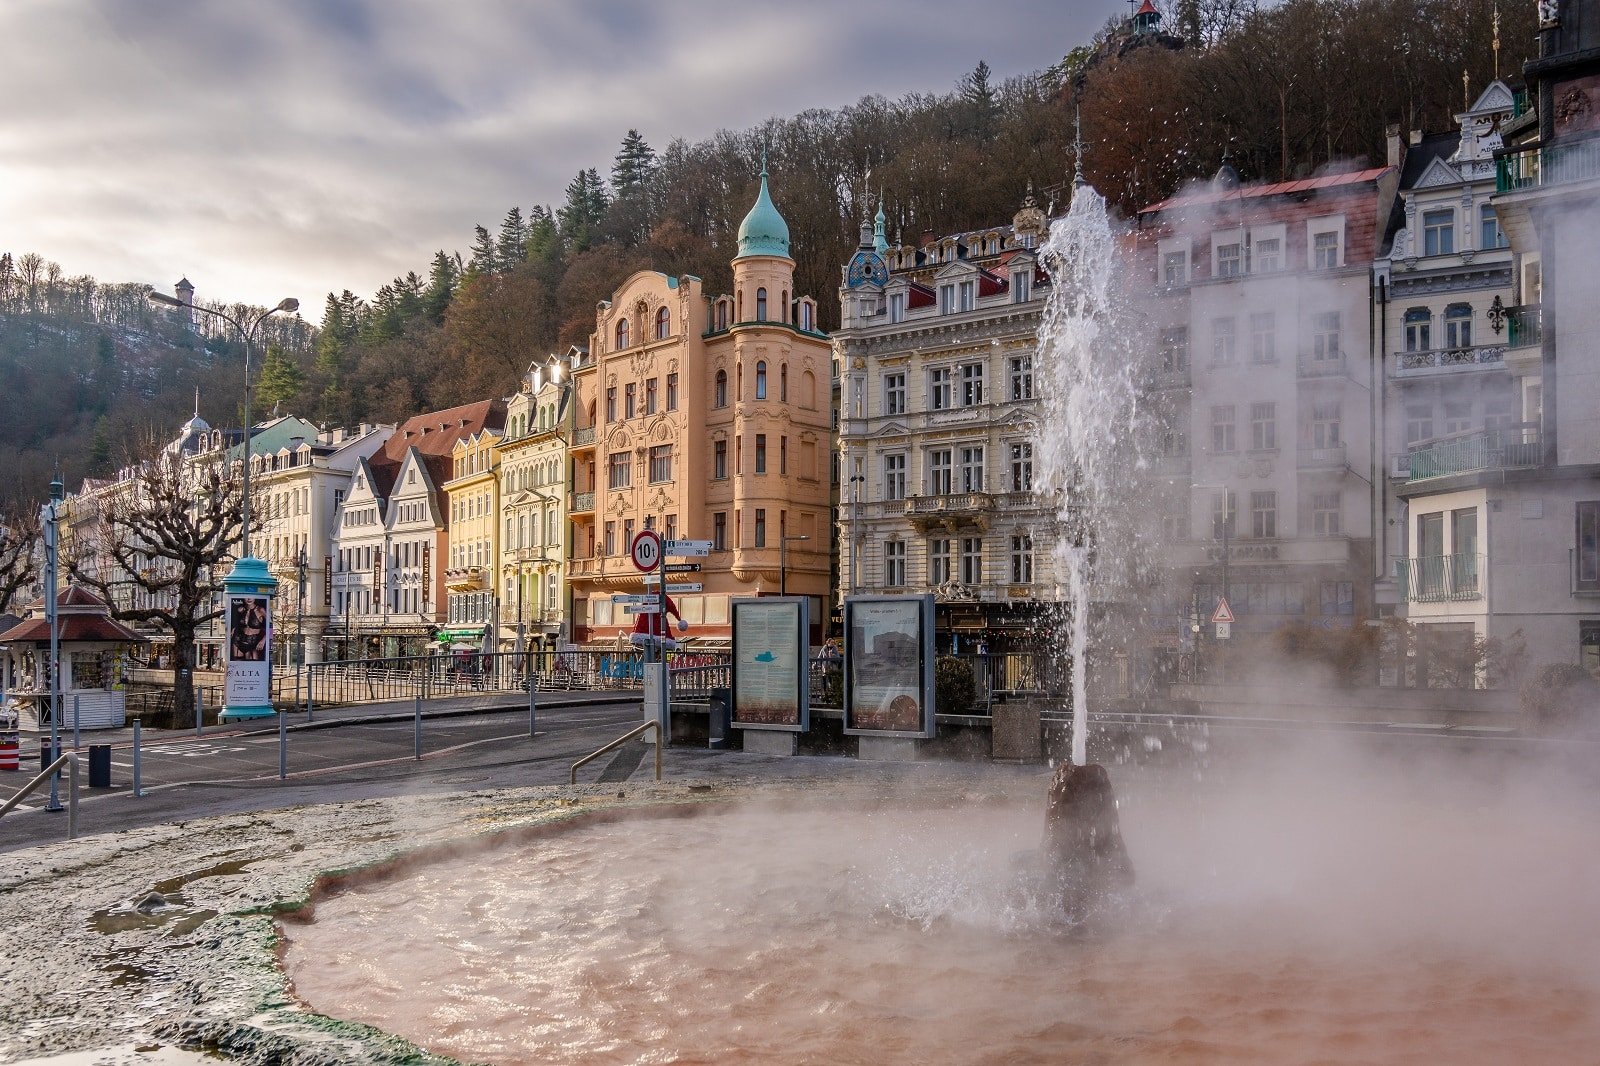 <p><span>If you are looking for a hidden gem in the heart of Europe, you might want to visit Karlovy Vary in the Czech Republic. This picturesque spa town is famous for its hot mineral springs that have healing properties and are used for drinking cures and balneotherapy.</span></p> <p><span>You can stroll along the elegant colonnades, admire the neo-Renaissance architecture, and enjoy the views from the hilltop lookout tower. You can also explore the rich cultural and historical heritage of Karlovy Vary, which has attracted many famous artists, musicians, writers, and celebrities over the centuries.</span></p> <p><b>Insider’s Tip: </b><span>Sample the traditional spa wafers and Becherovka, a herbal liqueur, for a taste of local flavors.</span></p> <p><b>When To Travel: </b><span>Late spring to early autumn for the best weather and the opportunity to attend various cultural festivals.</span></p> <p><b>How To Get There: </b><span>Karlovy Vary is about a two-hour drive from Prague, with regular bus and train services available.</span></p>